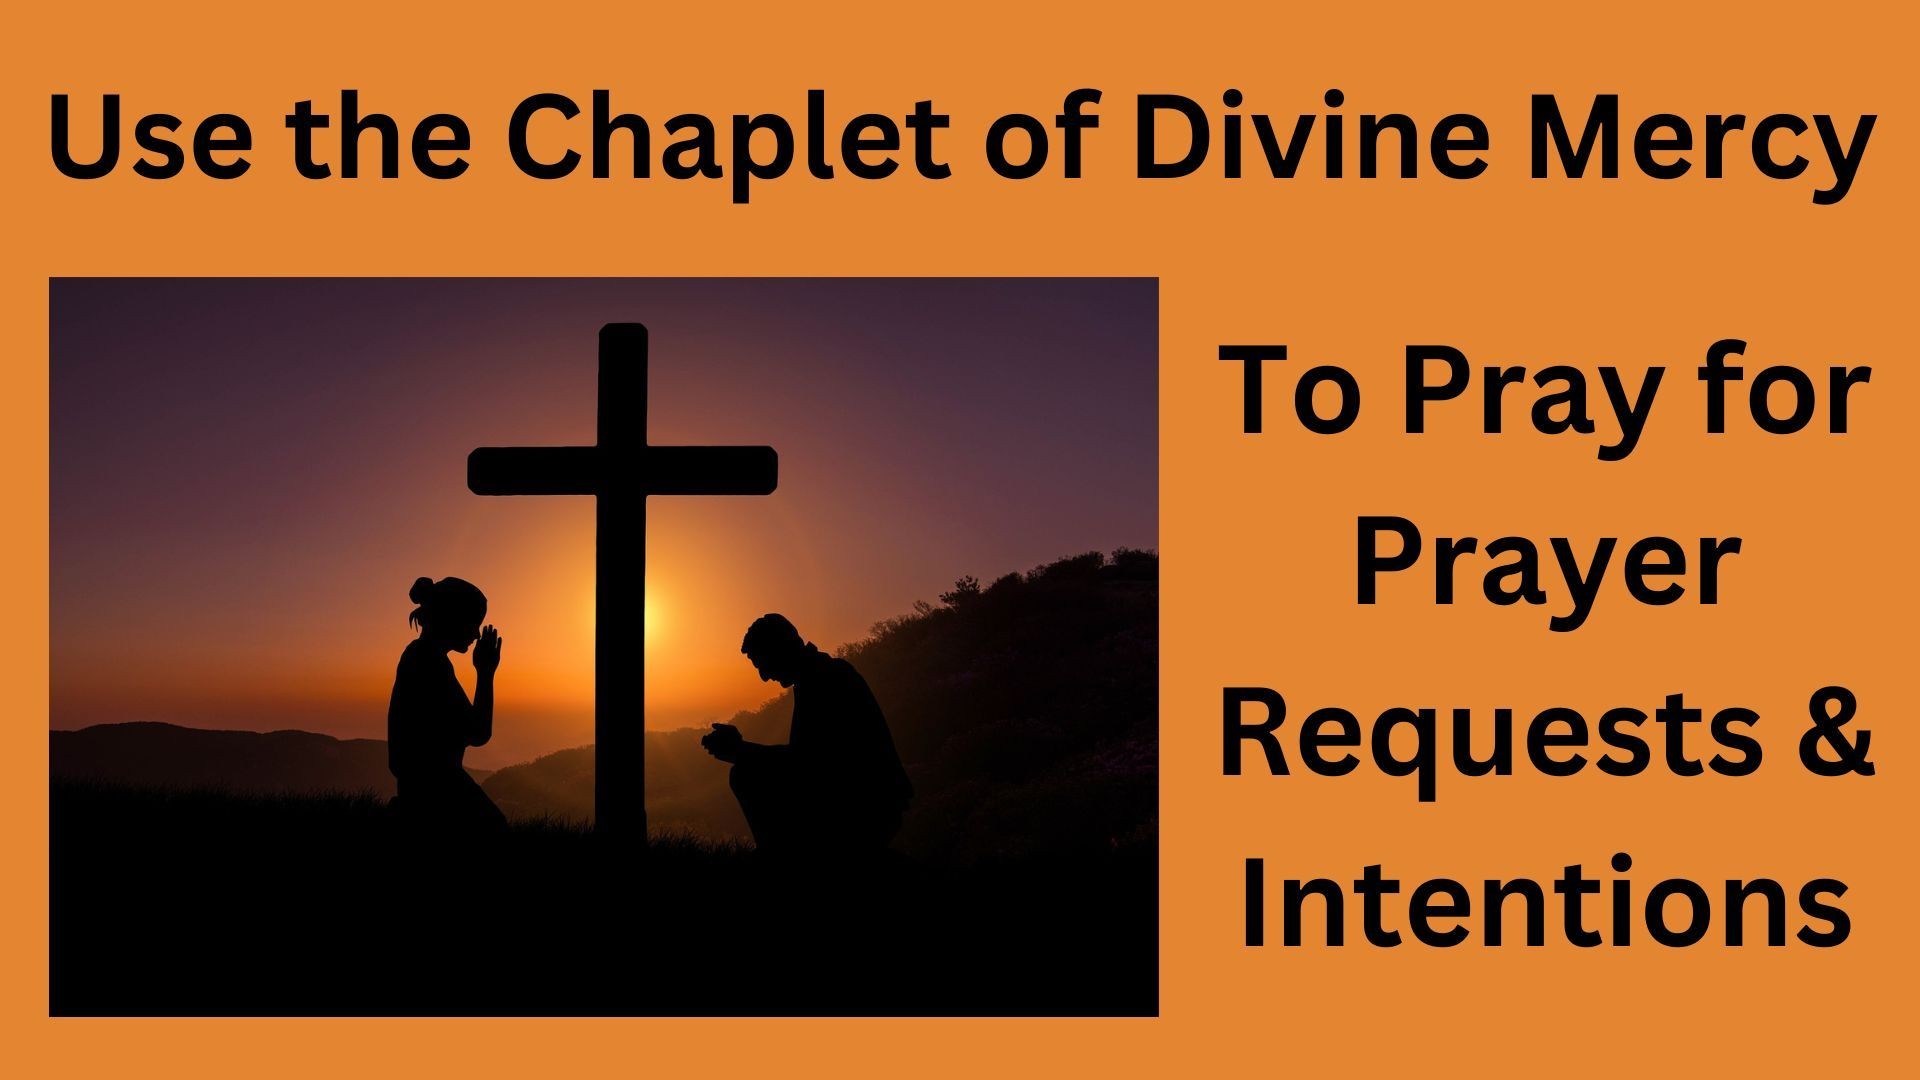 How to Use Prayer 3x5s for Praying Your Prayer Requests/Intentions with the Chaplet of Divine Mercy